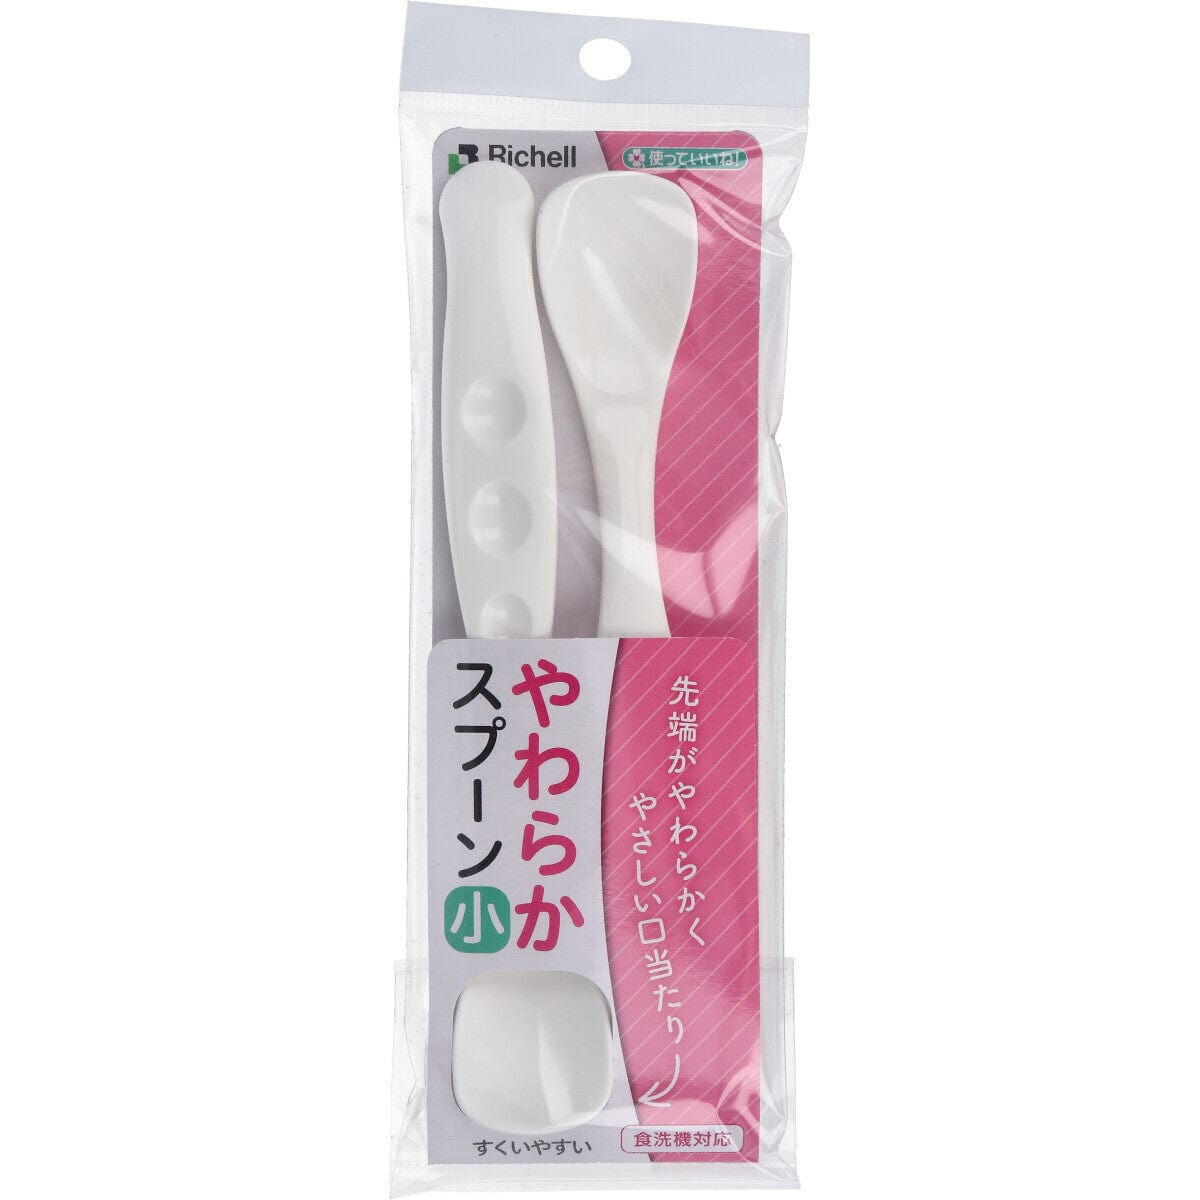 Richell - You Can Use It Baby Soft Spoon 2 Pieces - White Baby Spoon 4945680400503 Durio.sg